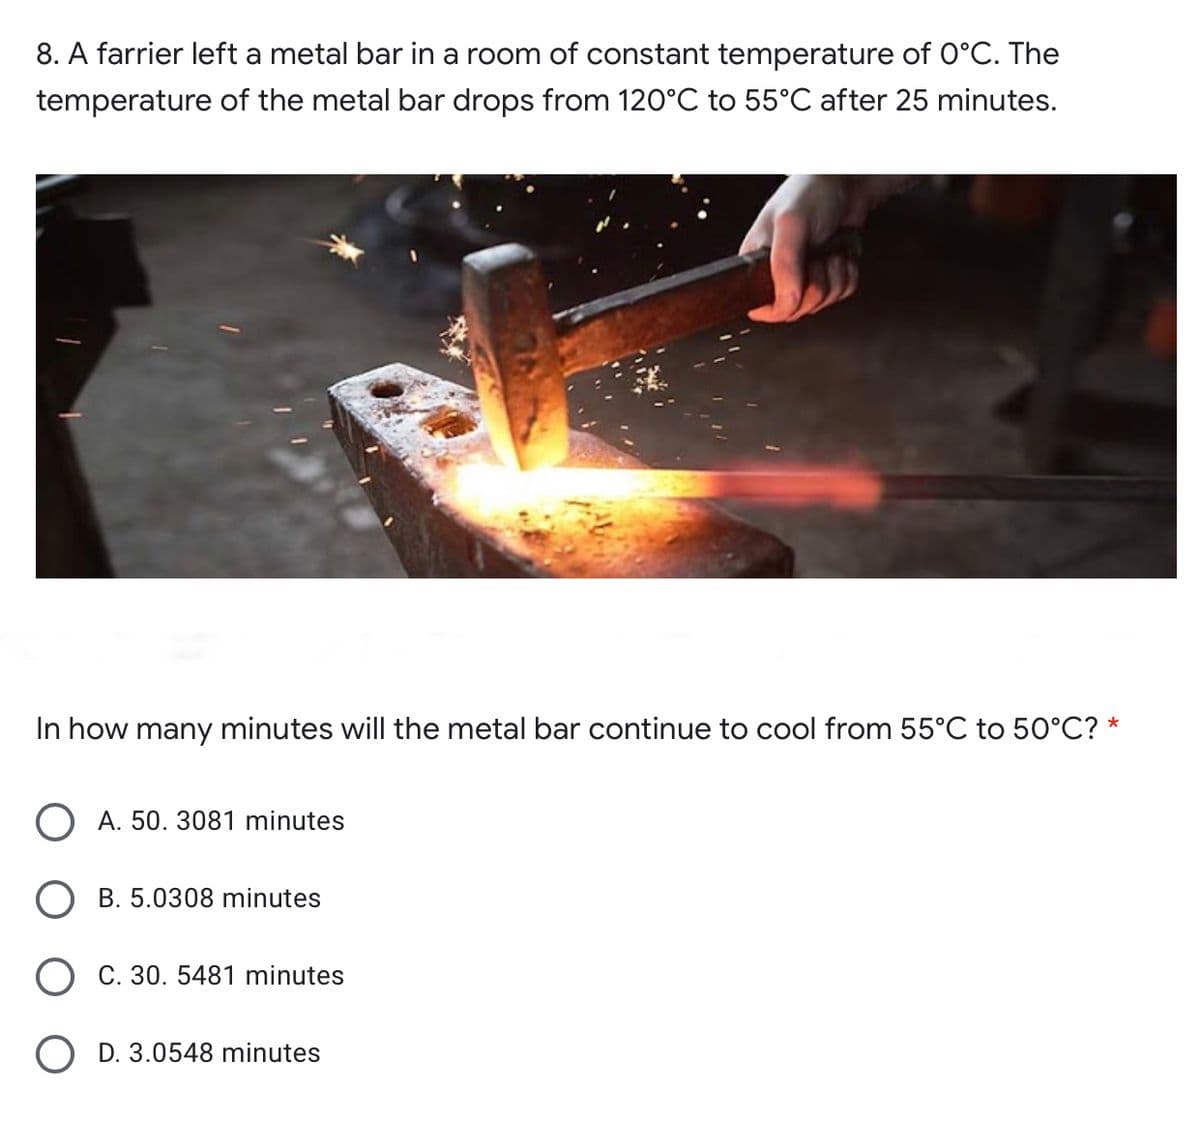 8. A farrier left a metal bar in a room of constant temperature of 0°C. The
temperature of the metal bar drops from 120°C to 55°C after 25 minutes.
In how many minutes will the metal bar continue to cool from 55°C to 50°C? *
O A. 50. 3081 minutes
B. 5.0308 minutes
O C. 30. 5481 minutes
O D. 3.0548 minutes
